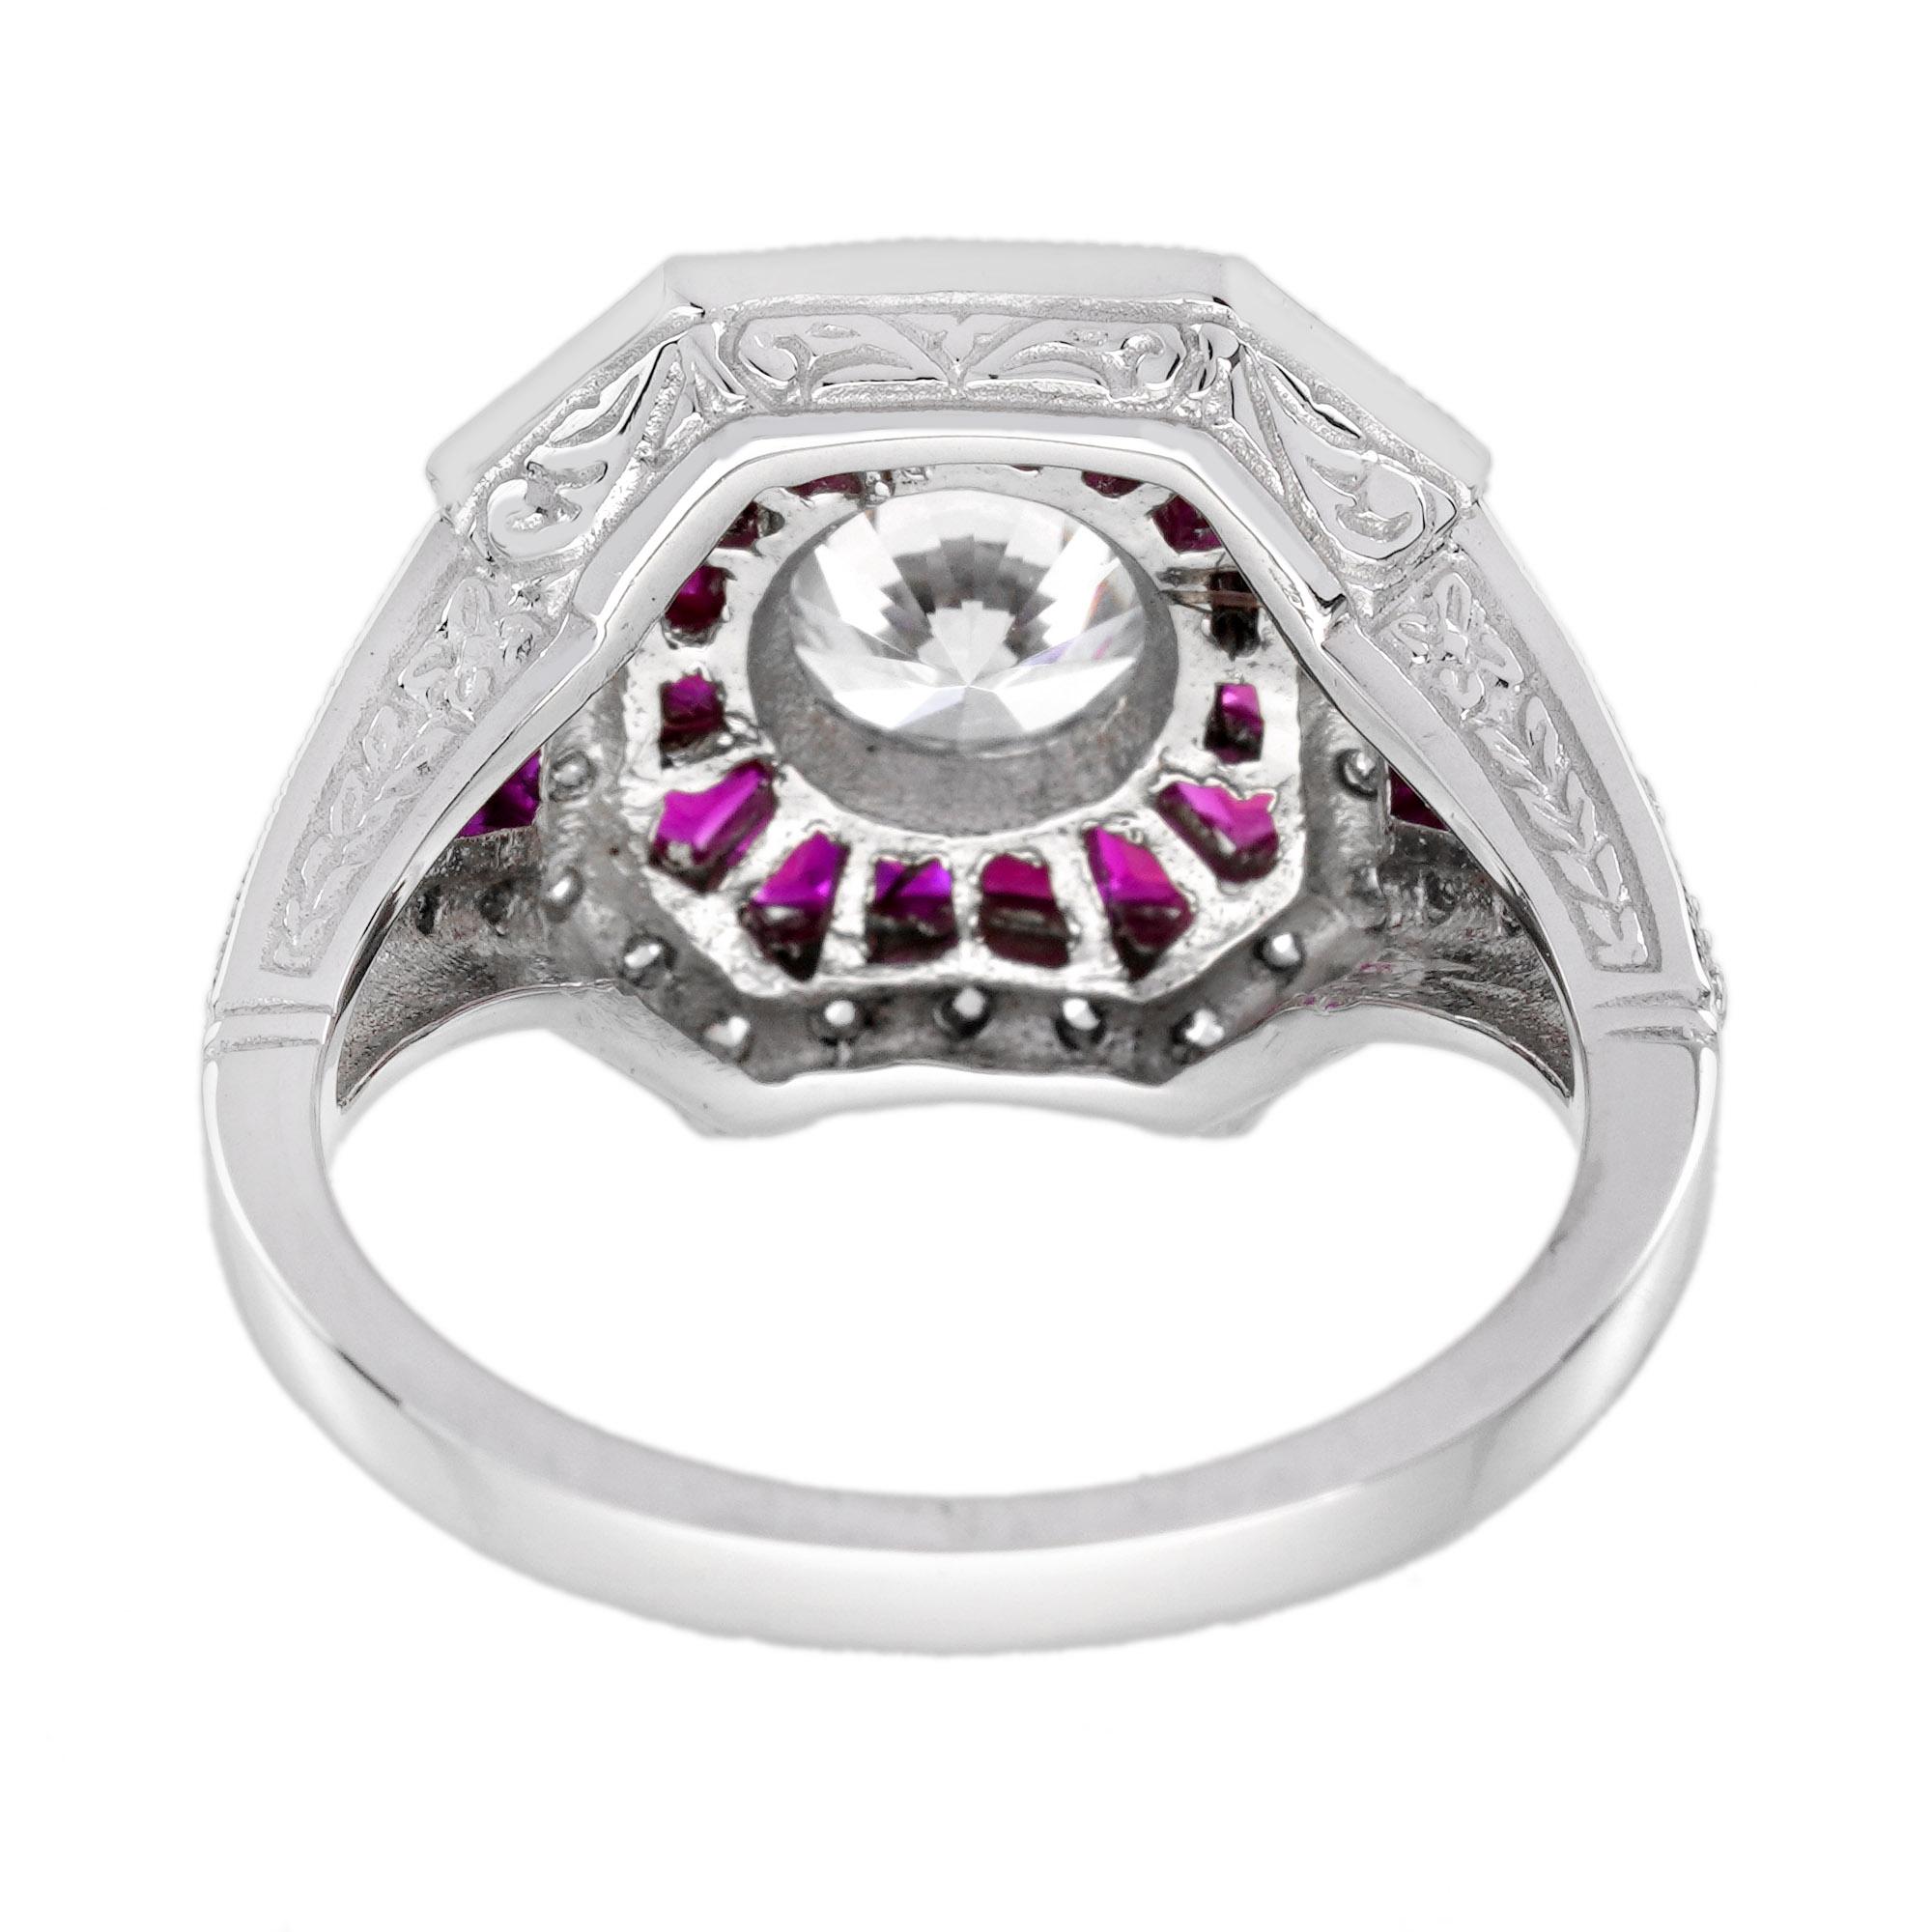 Women's 1 Ct. Diamond and Ruby Art Deco Style Engagement Ring in 18K White Gold For Sale